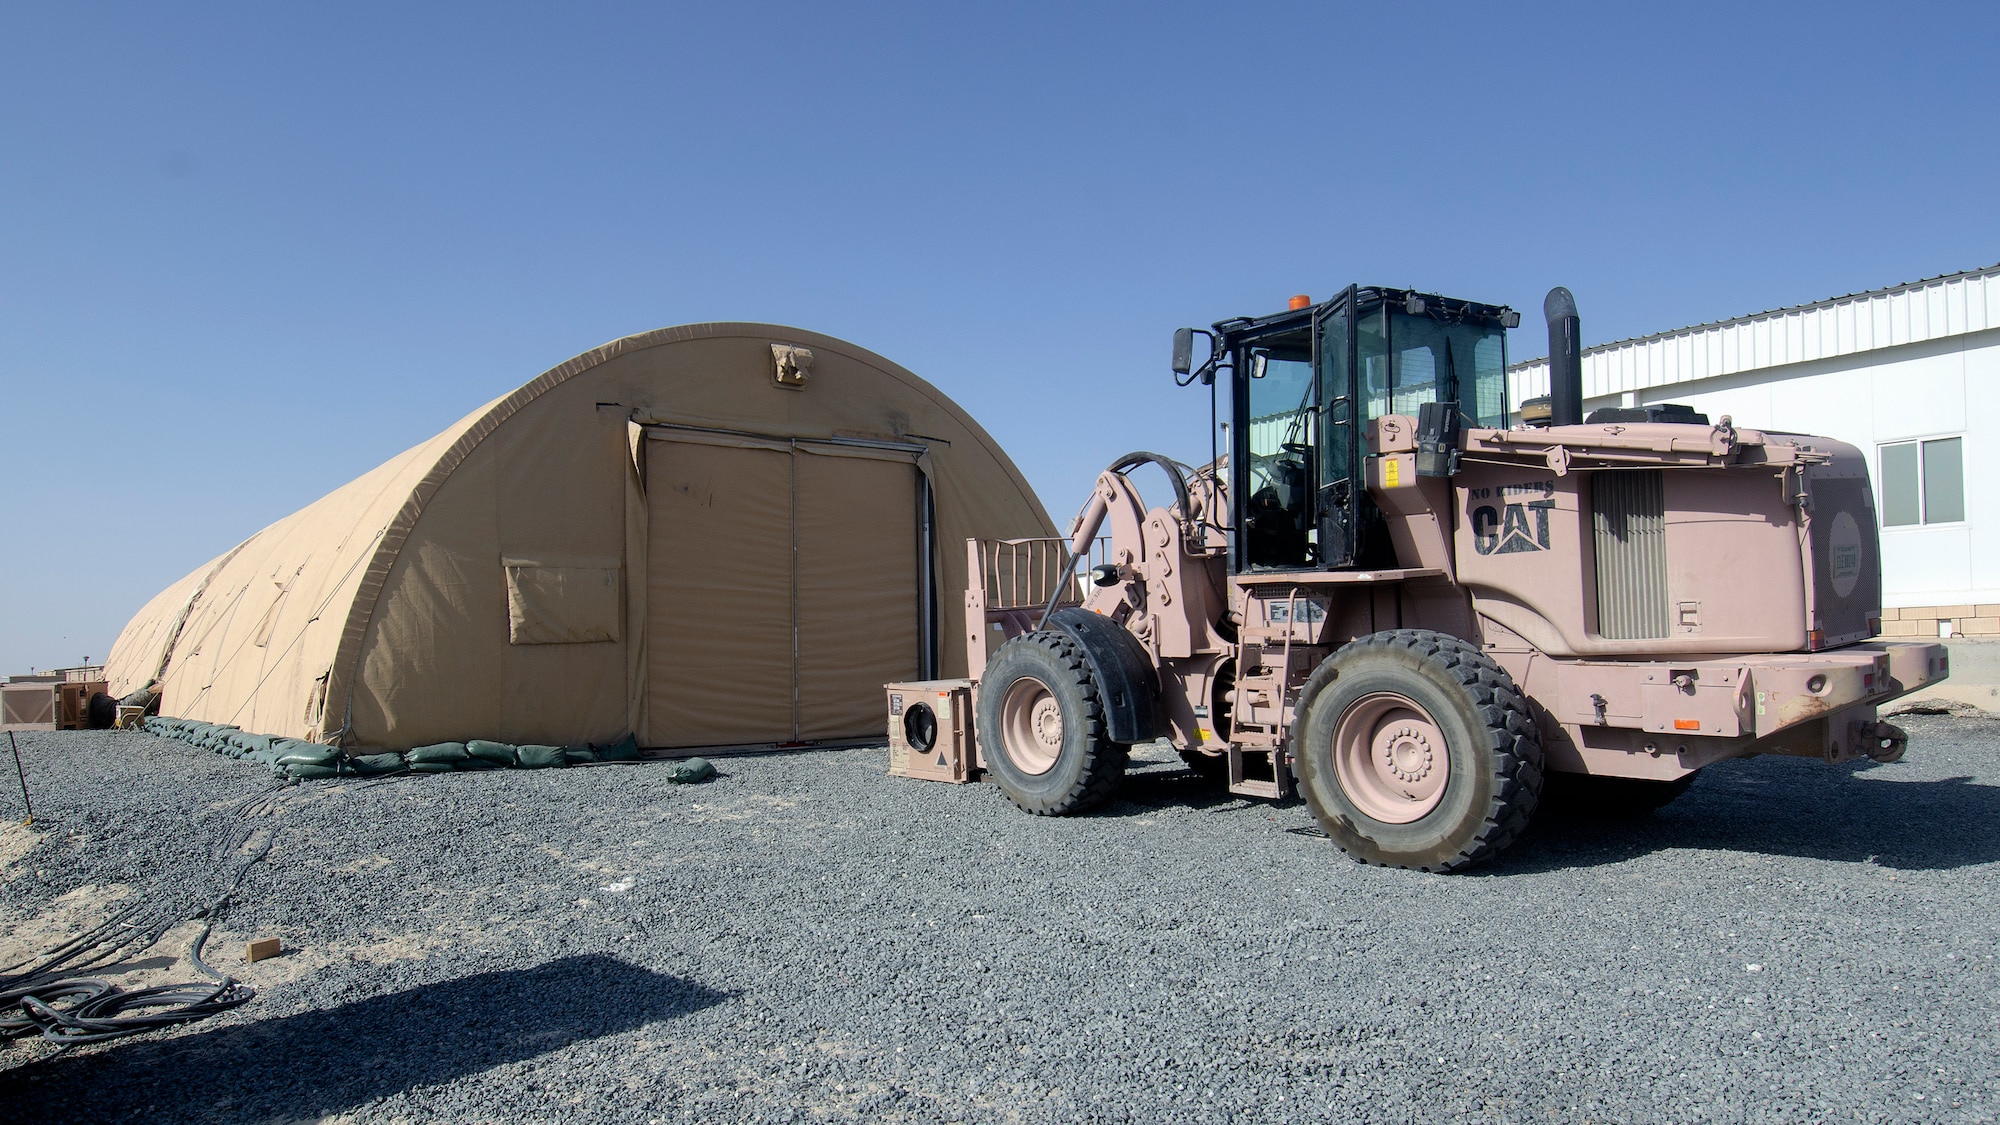 Airmen with the 386th Expeditionary Force Support Squadron and 386th Expeditionary Civil Engineer Squadron set up a new temporary fitness tent on Ali Al Salem Air Base, Kuwait, July 24, 2019. The new fitness tent is slated to open Aug.1, 2019, replacing the original facility which is scheduled for demolition to make room for future base improvement projects. This facility offers Airmen a second fitness location and expected to be in use until mid-November when the more permanent structure is completed. (U.S. Air Force photo by Capt. Stephen Hudson)